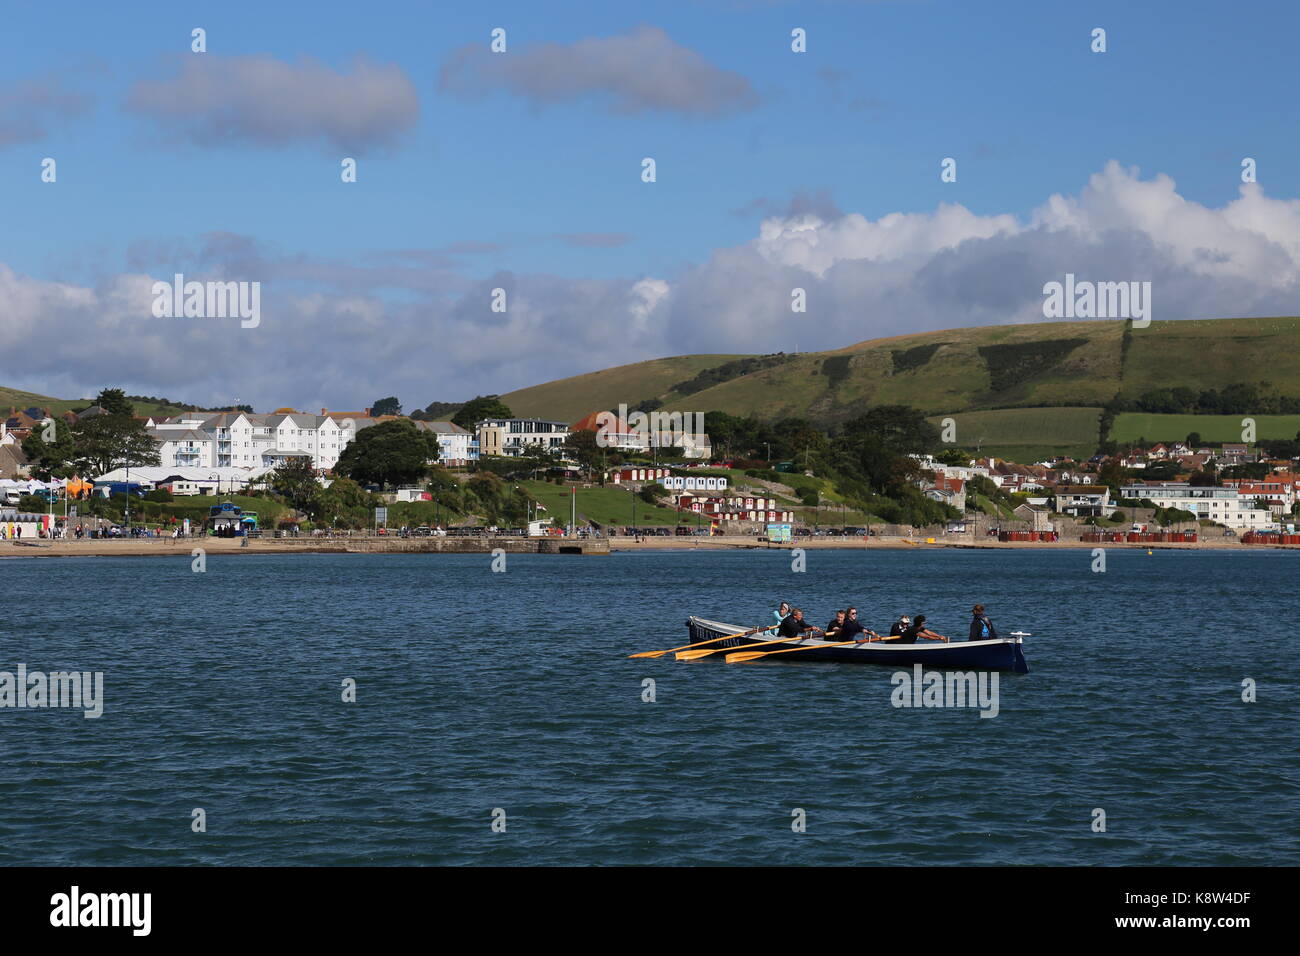 Swanage Meer rudern Club" Tilly Laune 'Pilot Gig in Swanage Bay, Swanage, Isle of Purbeck, Dorset, England, Großbritannien, USA, UK, Europa Stockfoto